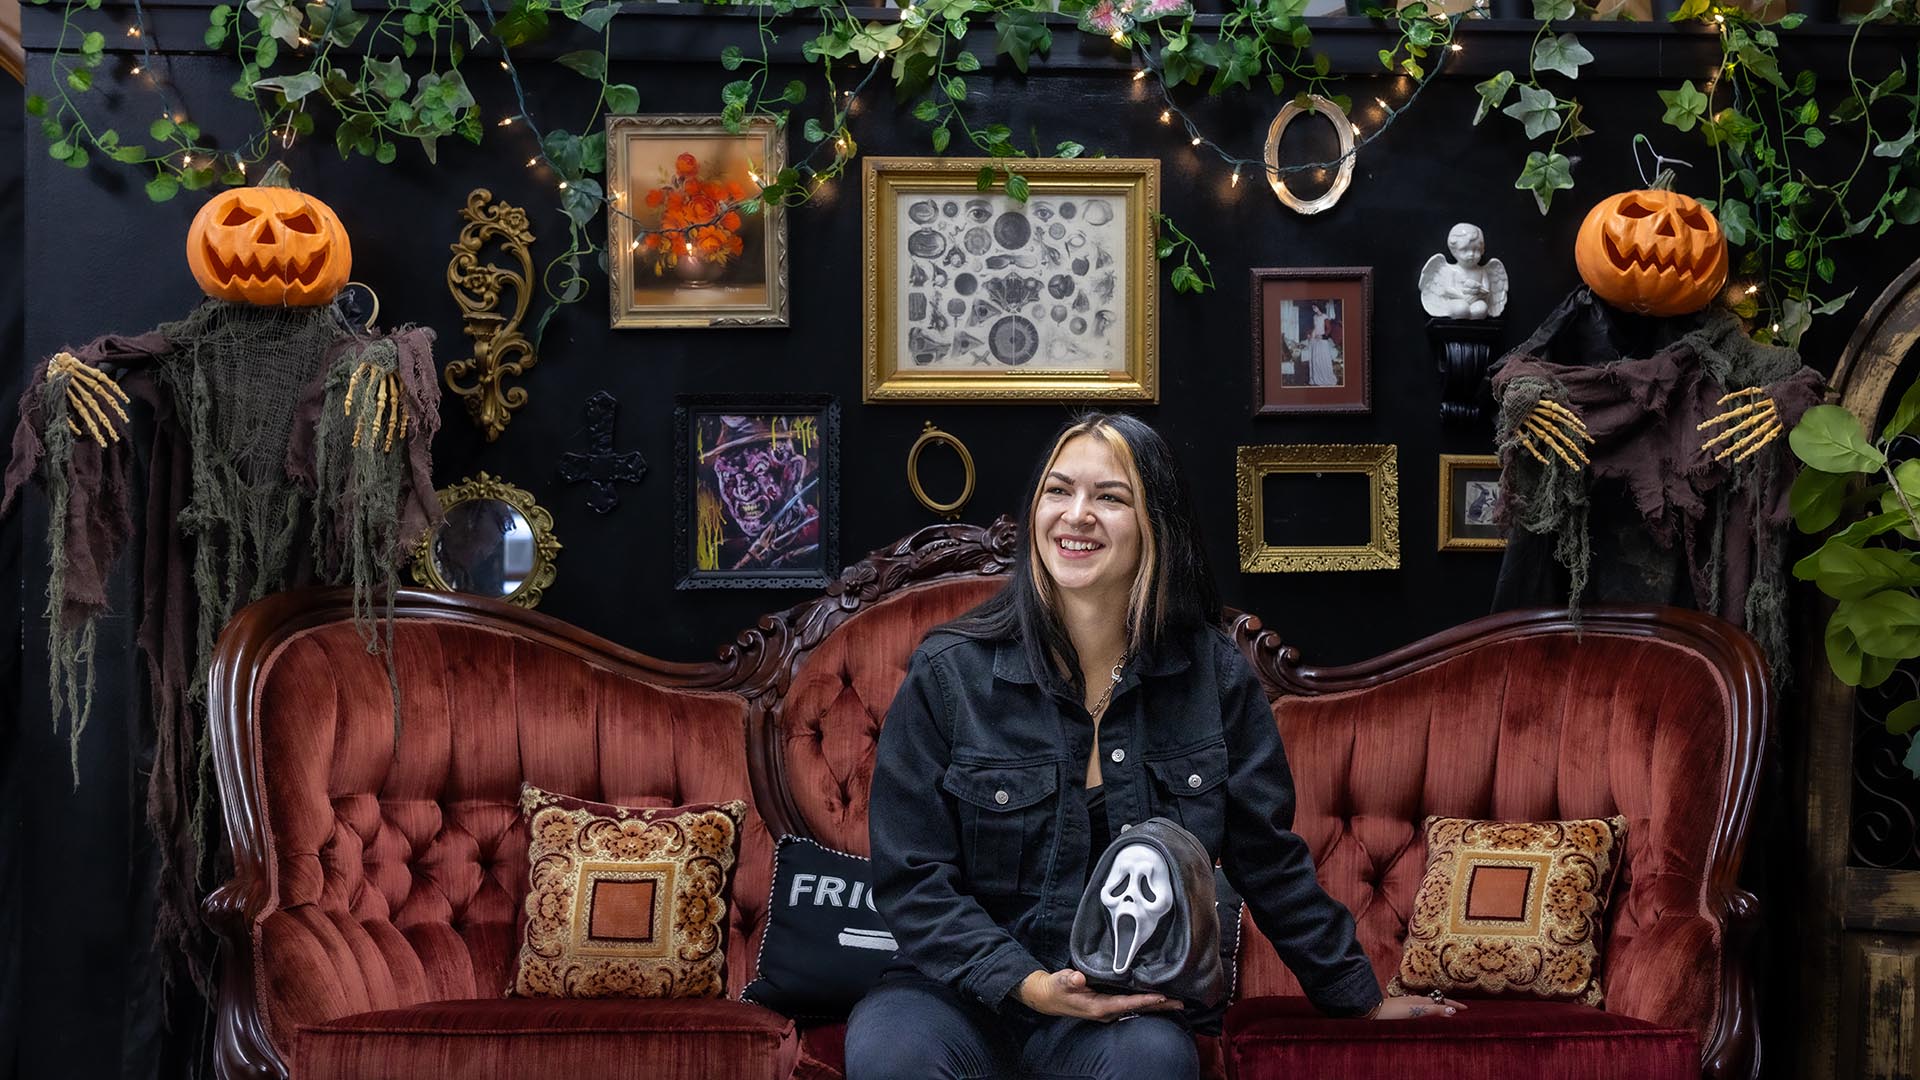 Emerald Boes, owner of HORRID mag and the shop, seats at her community space.